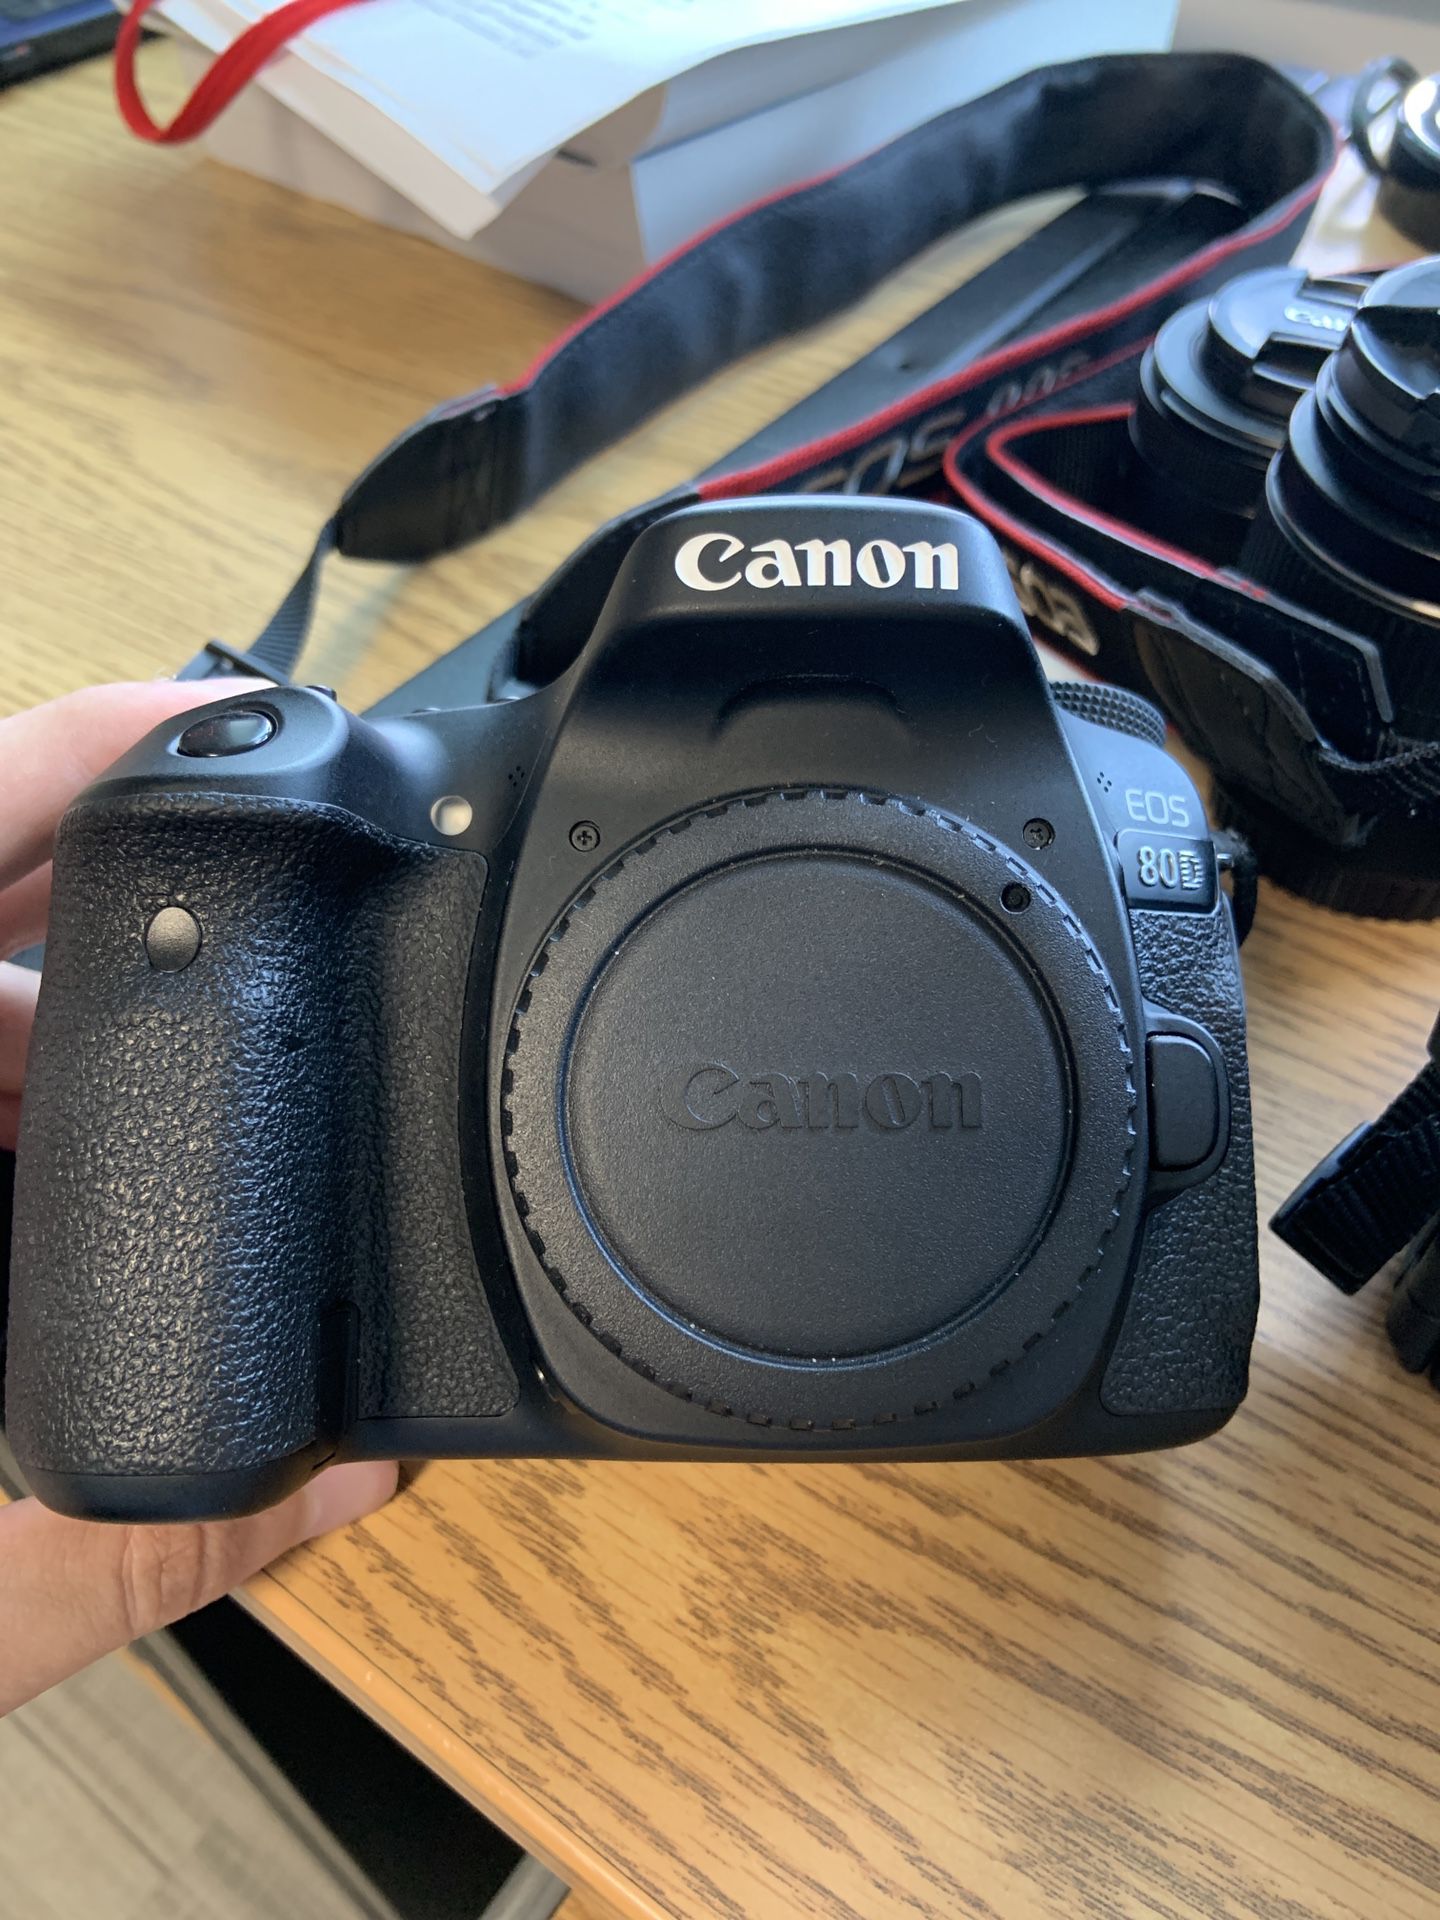 Canon Eos 80D, 50mm lens and 18-55mm lens, used but kept in great condition